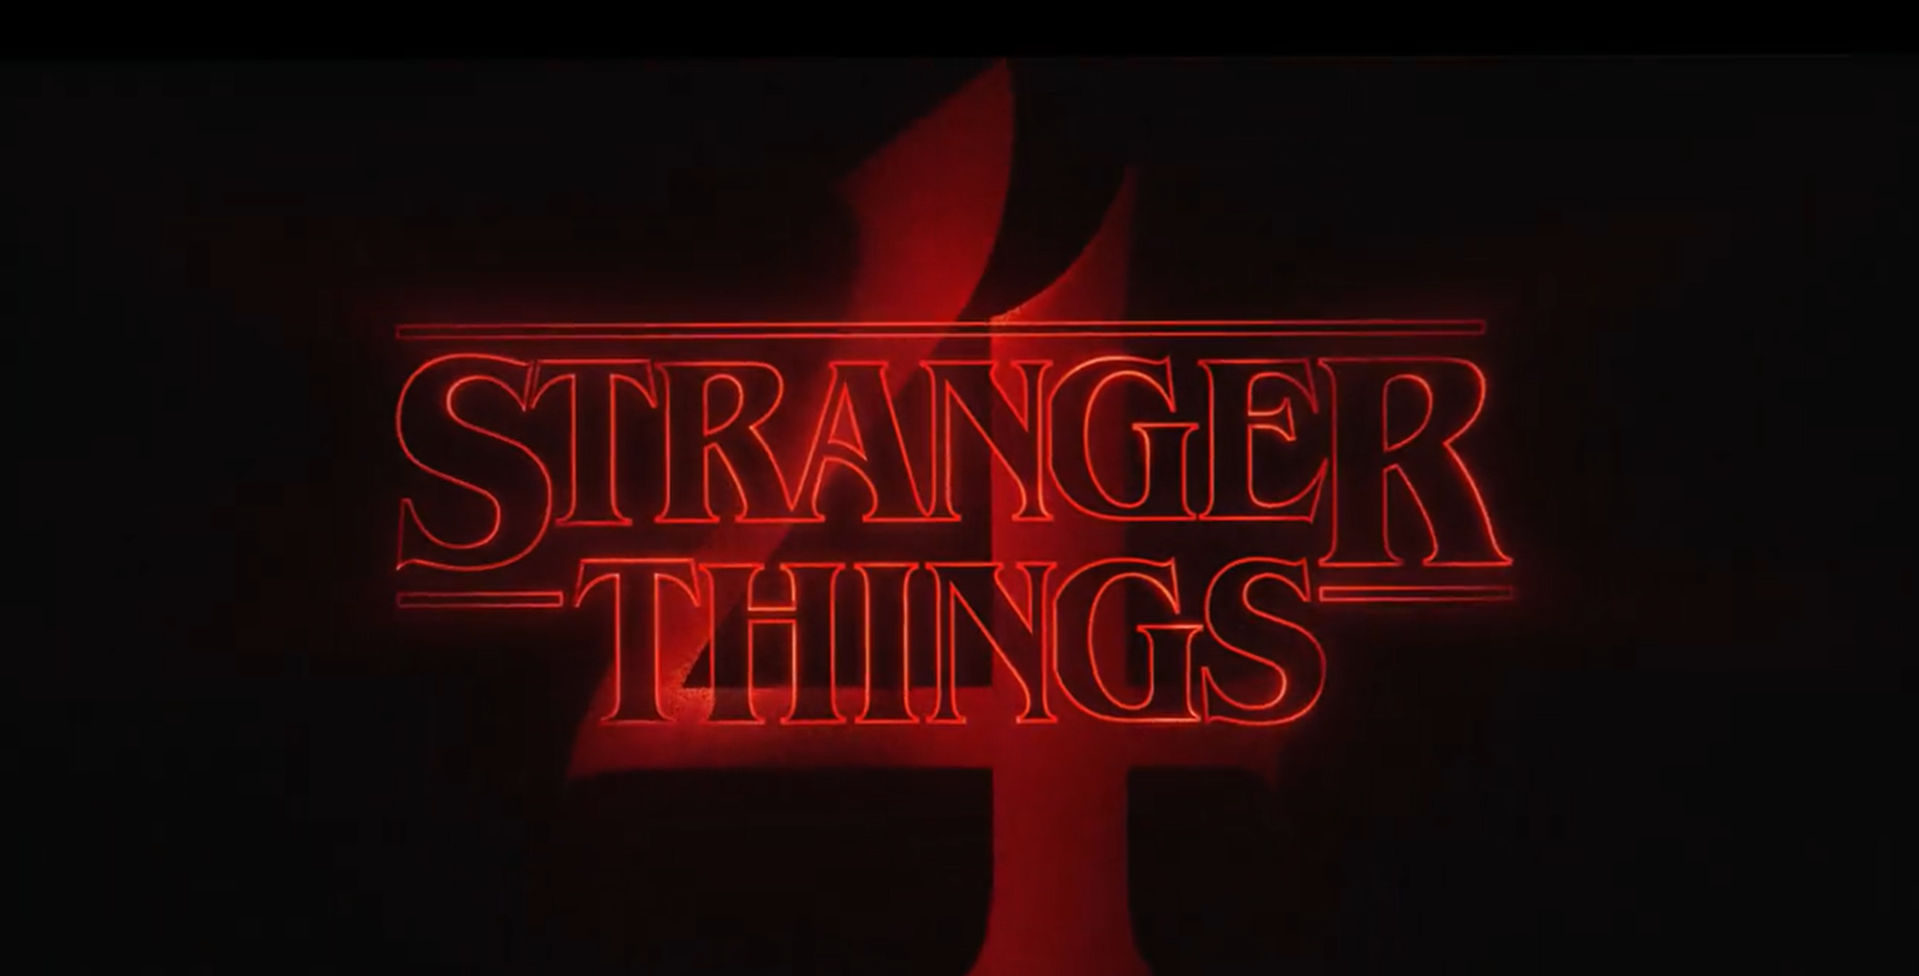 ‘Stranger Things’ Season 4 opening sequence reveals Eleven’s insanity | Watch